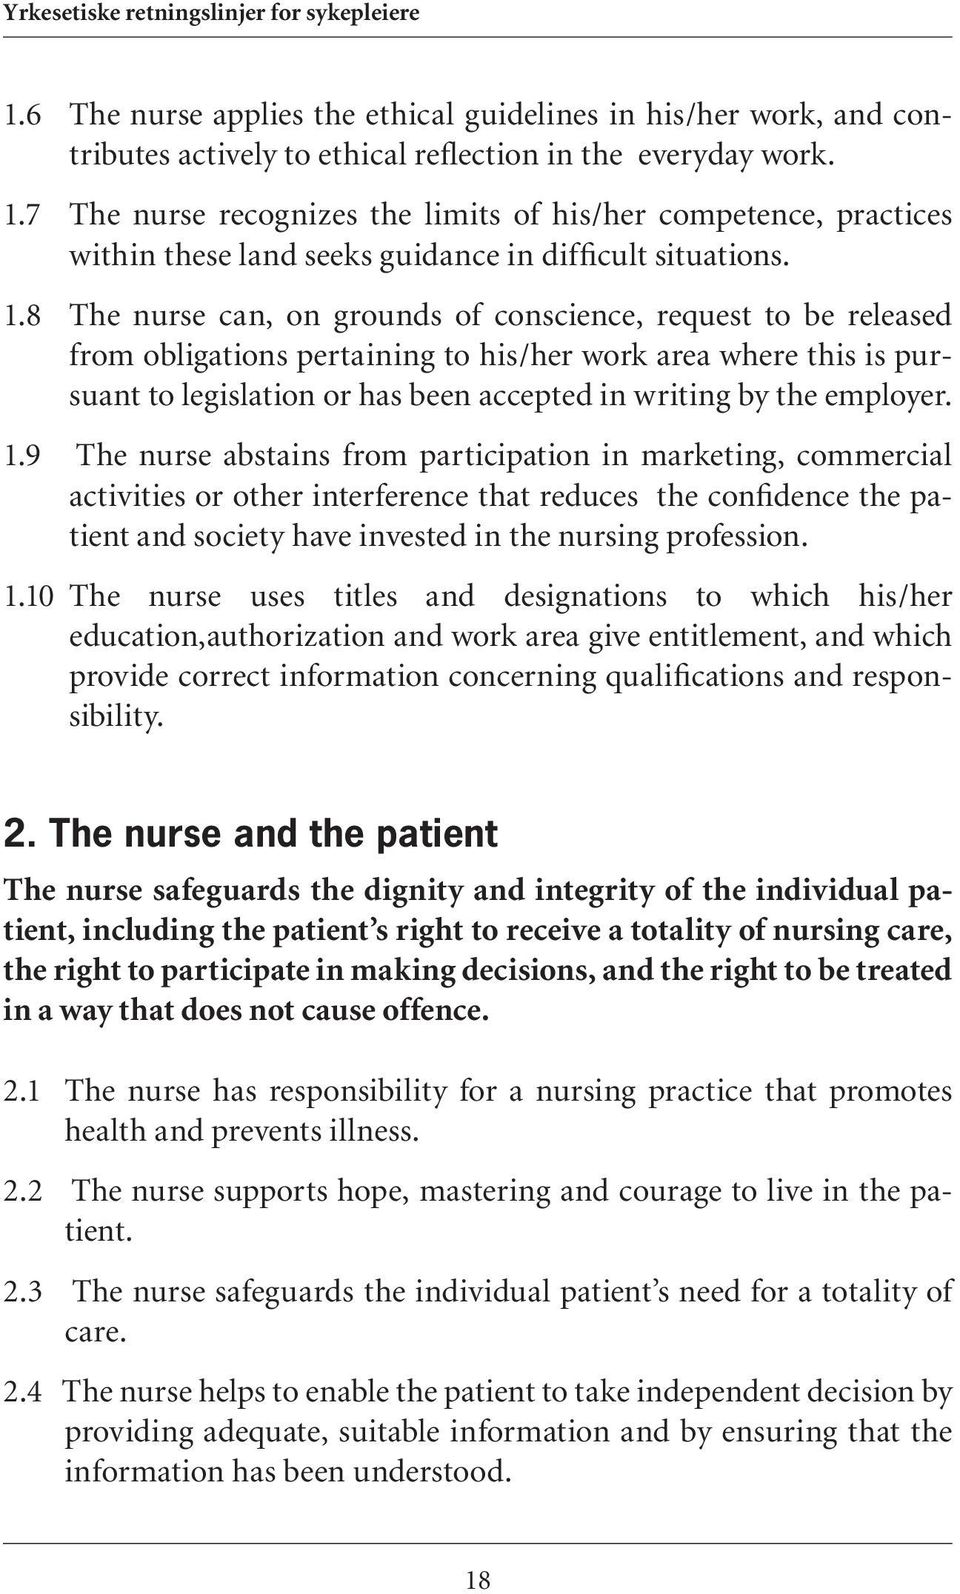 8 The nurse can, on grounds of conscience, request to be released from obligations pertaining to his/her work area where this is pursuant to legislation or has been accepted in writing by the